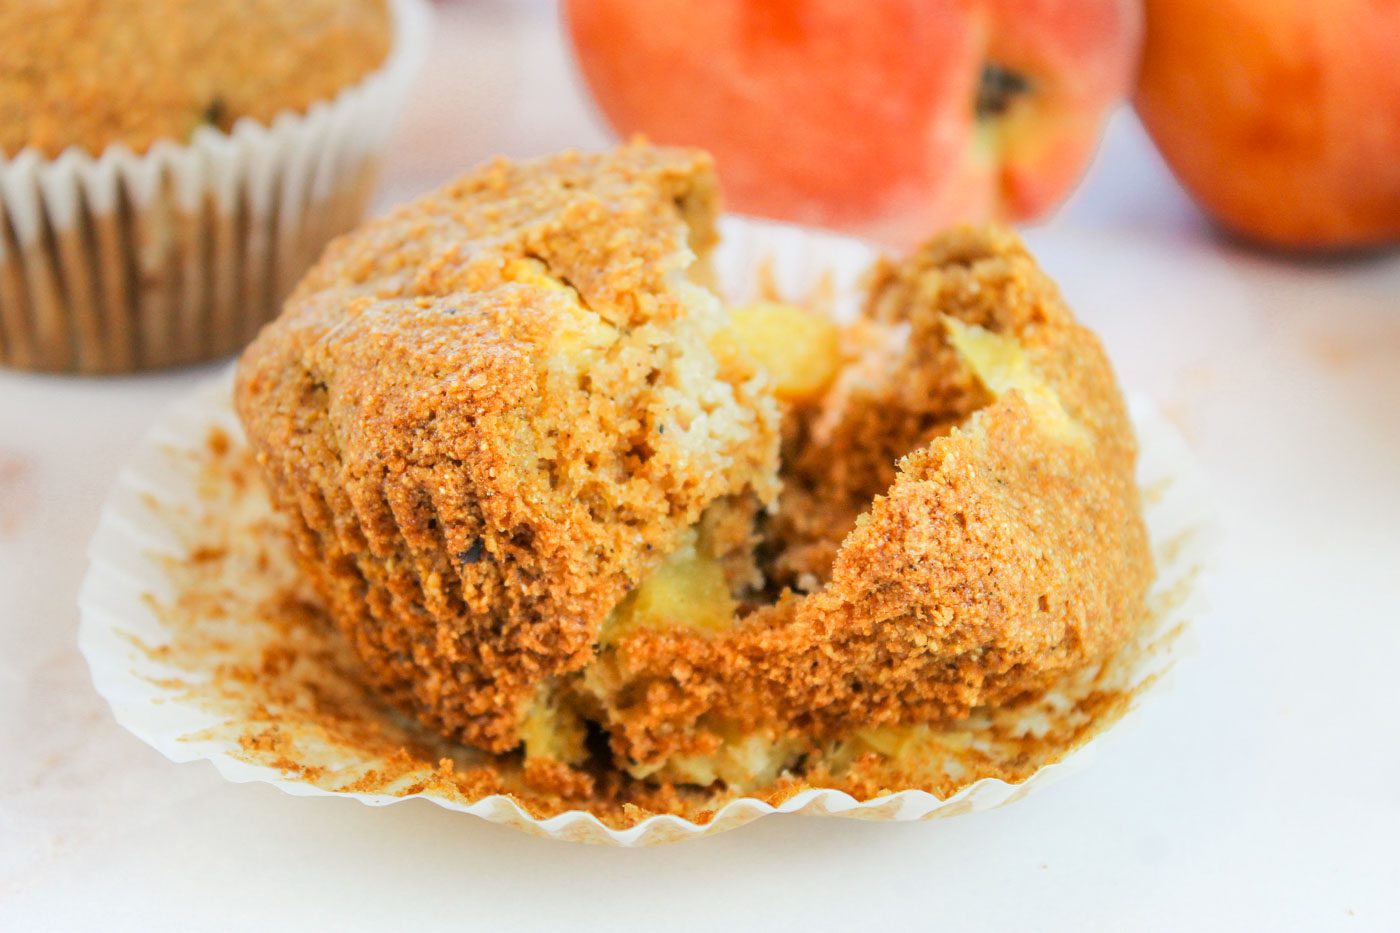 muffin cut in half revealing chunks of peaches and spices inside